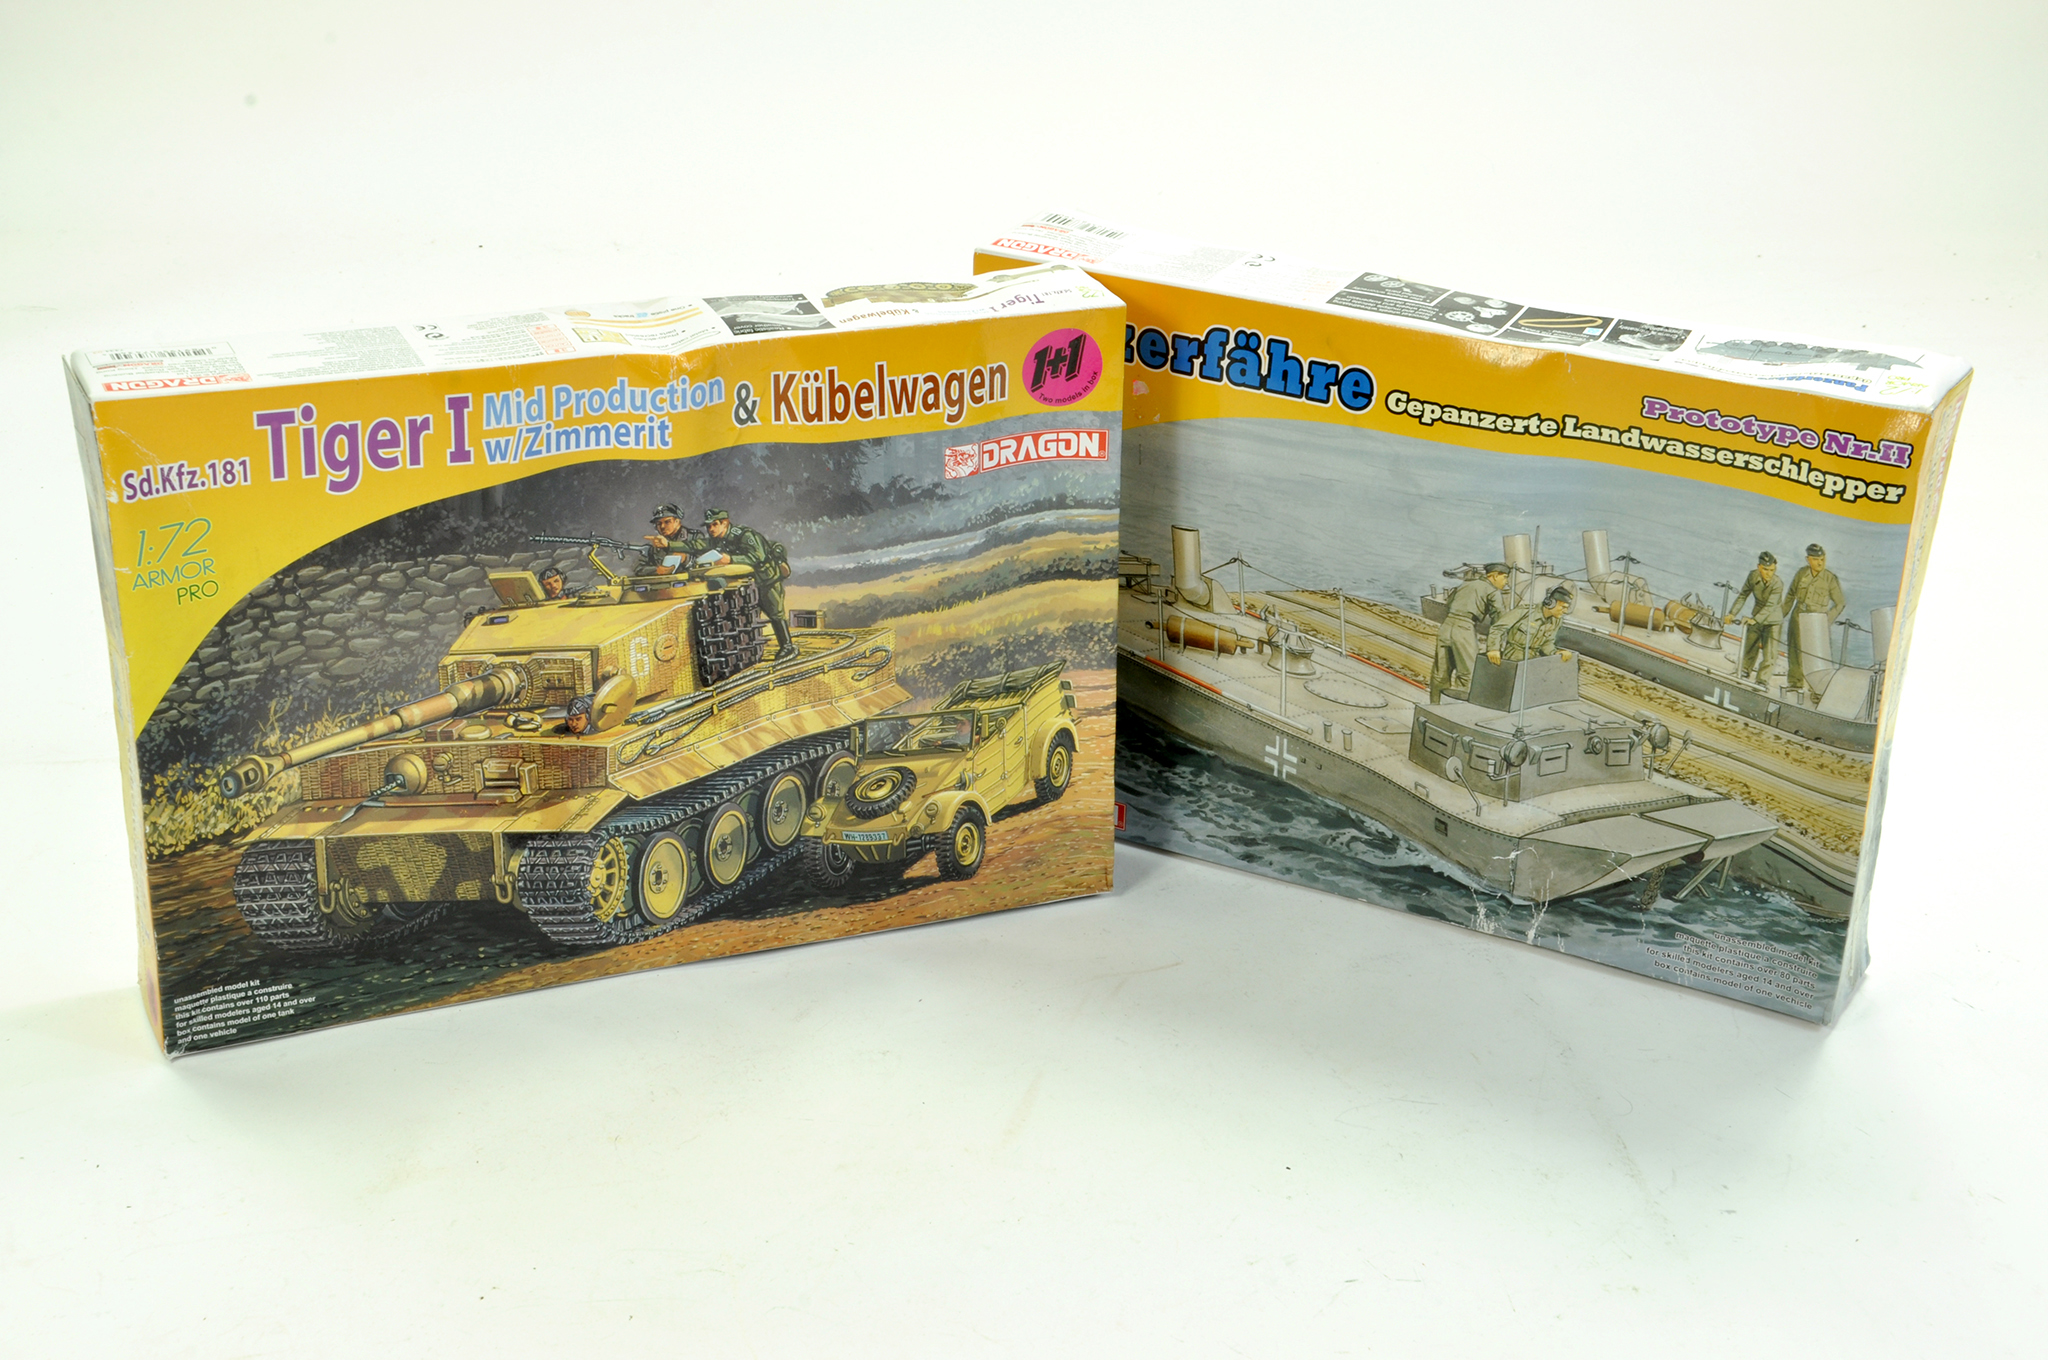 Dragon Plastic Model Kit comprising 1/72 Tiger I Tank plus one other. Sealed and Complete.